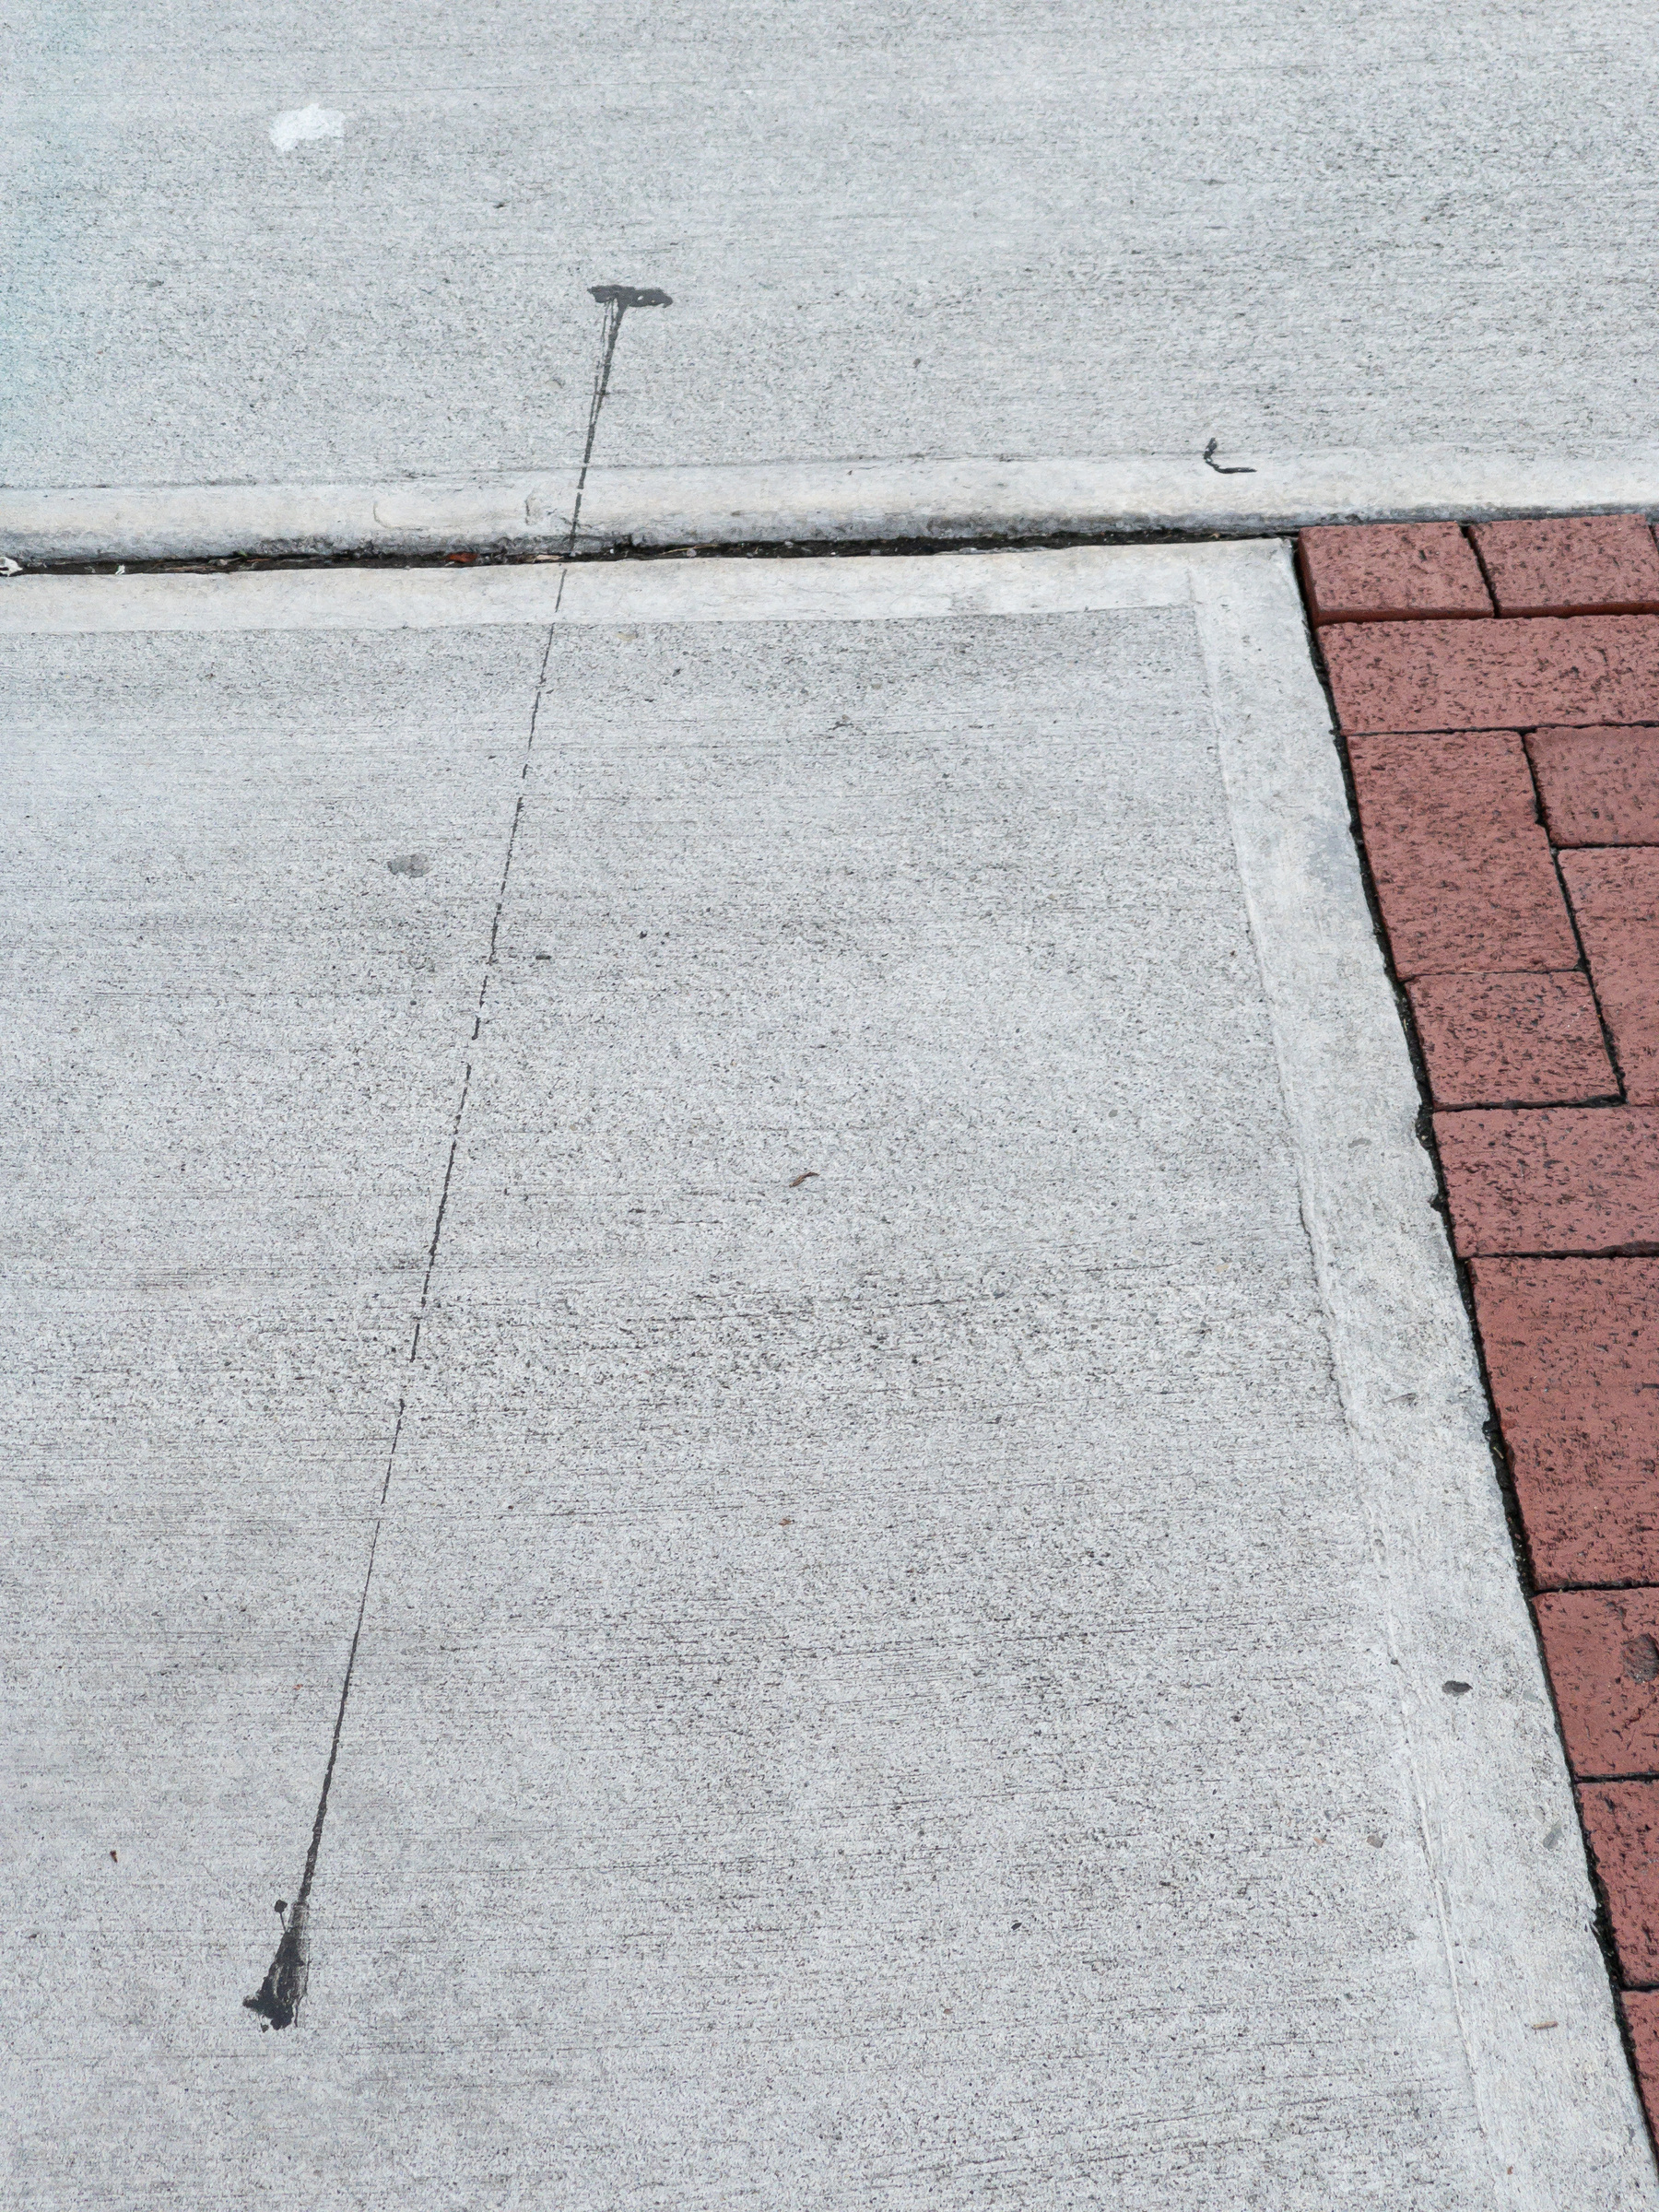 A black line of something tar like dribbled from the top middle of the frame to the bottom across an expansion joint in the concrete sidewalk. A triangle of brick paving to the right.